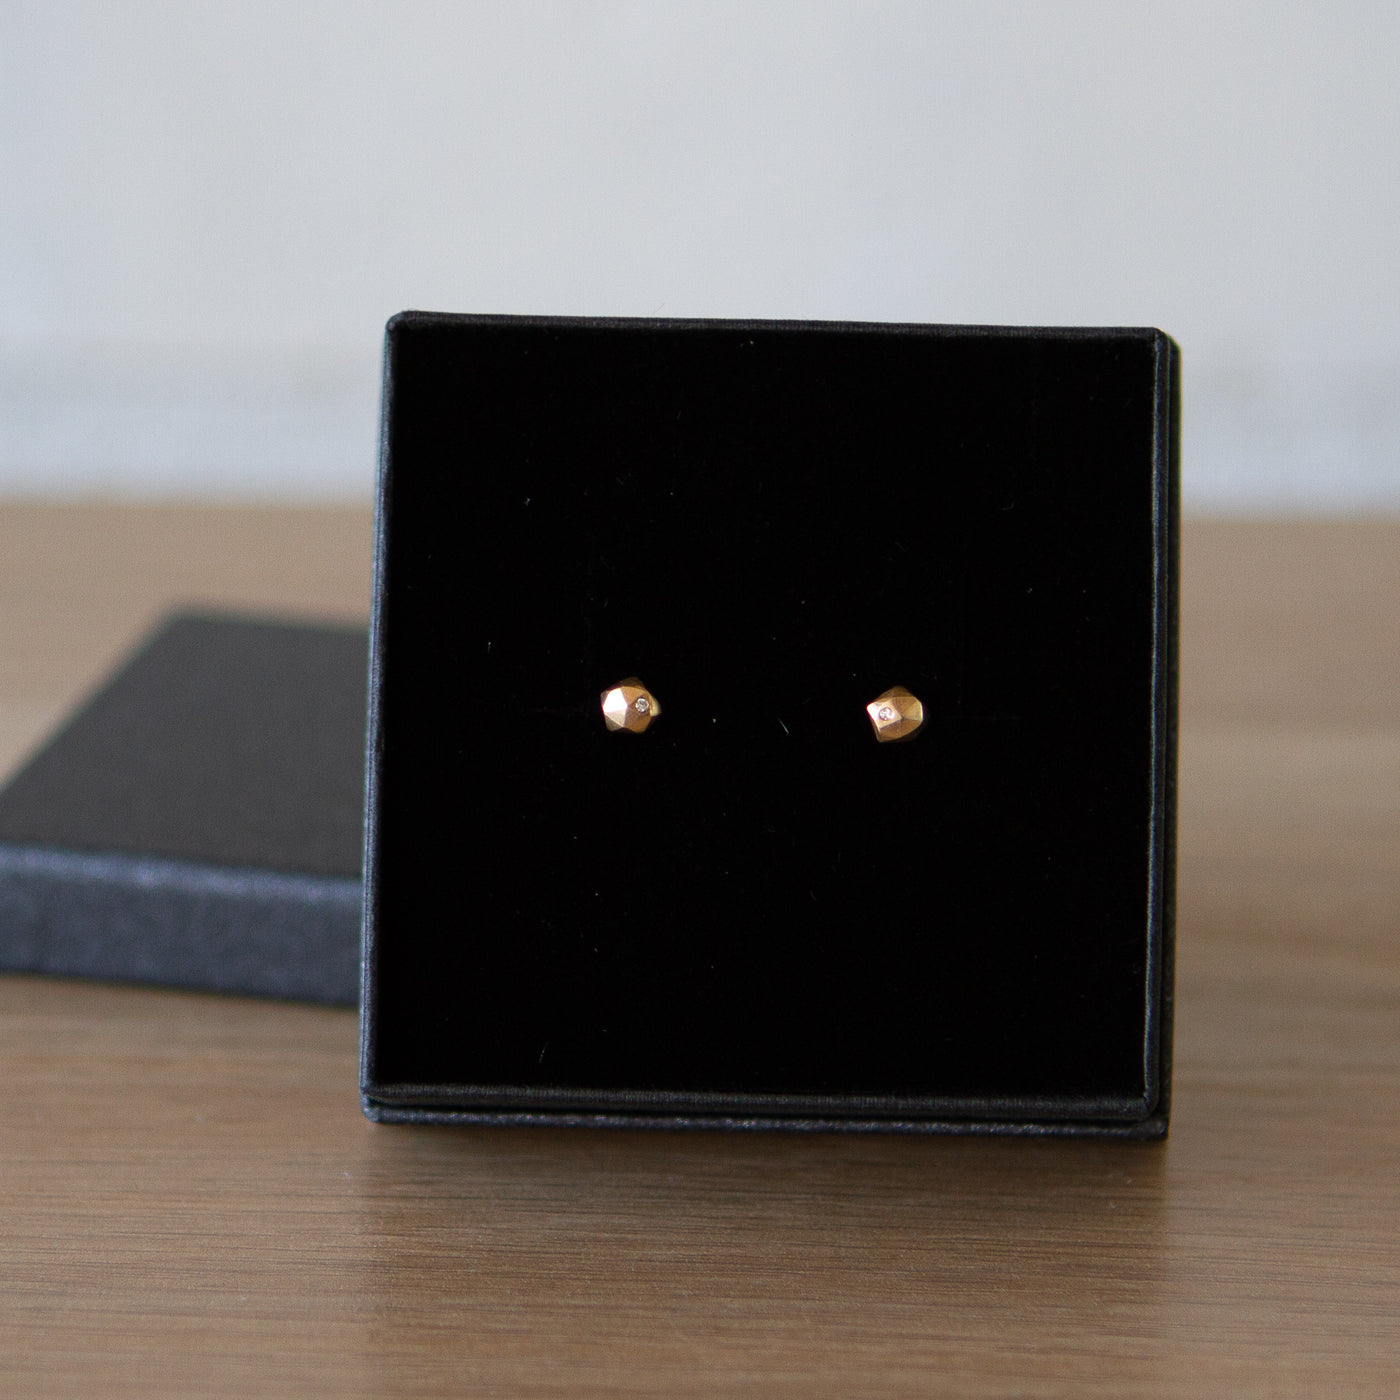 14k yellow gold geometric faceted stud earrings with diamonds in the micro size in a gift box by Corey Egan